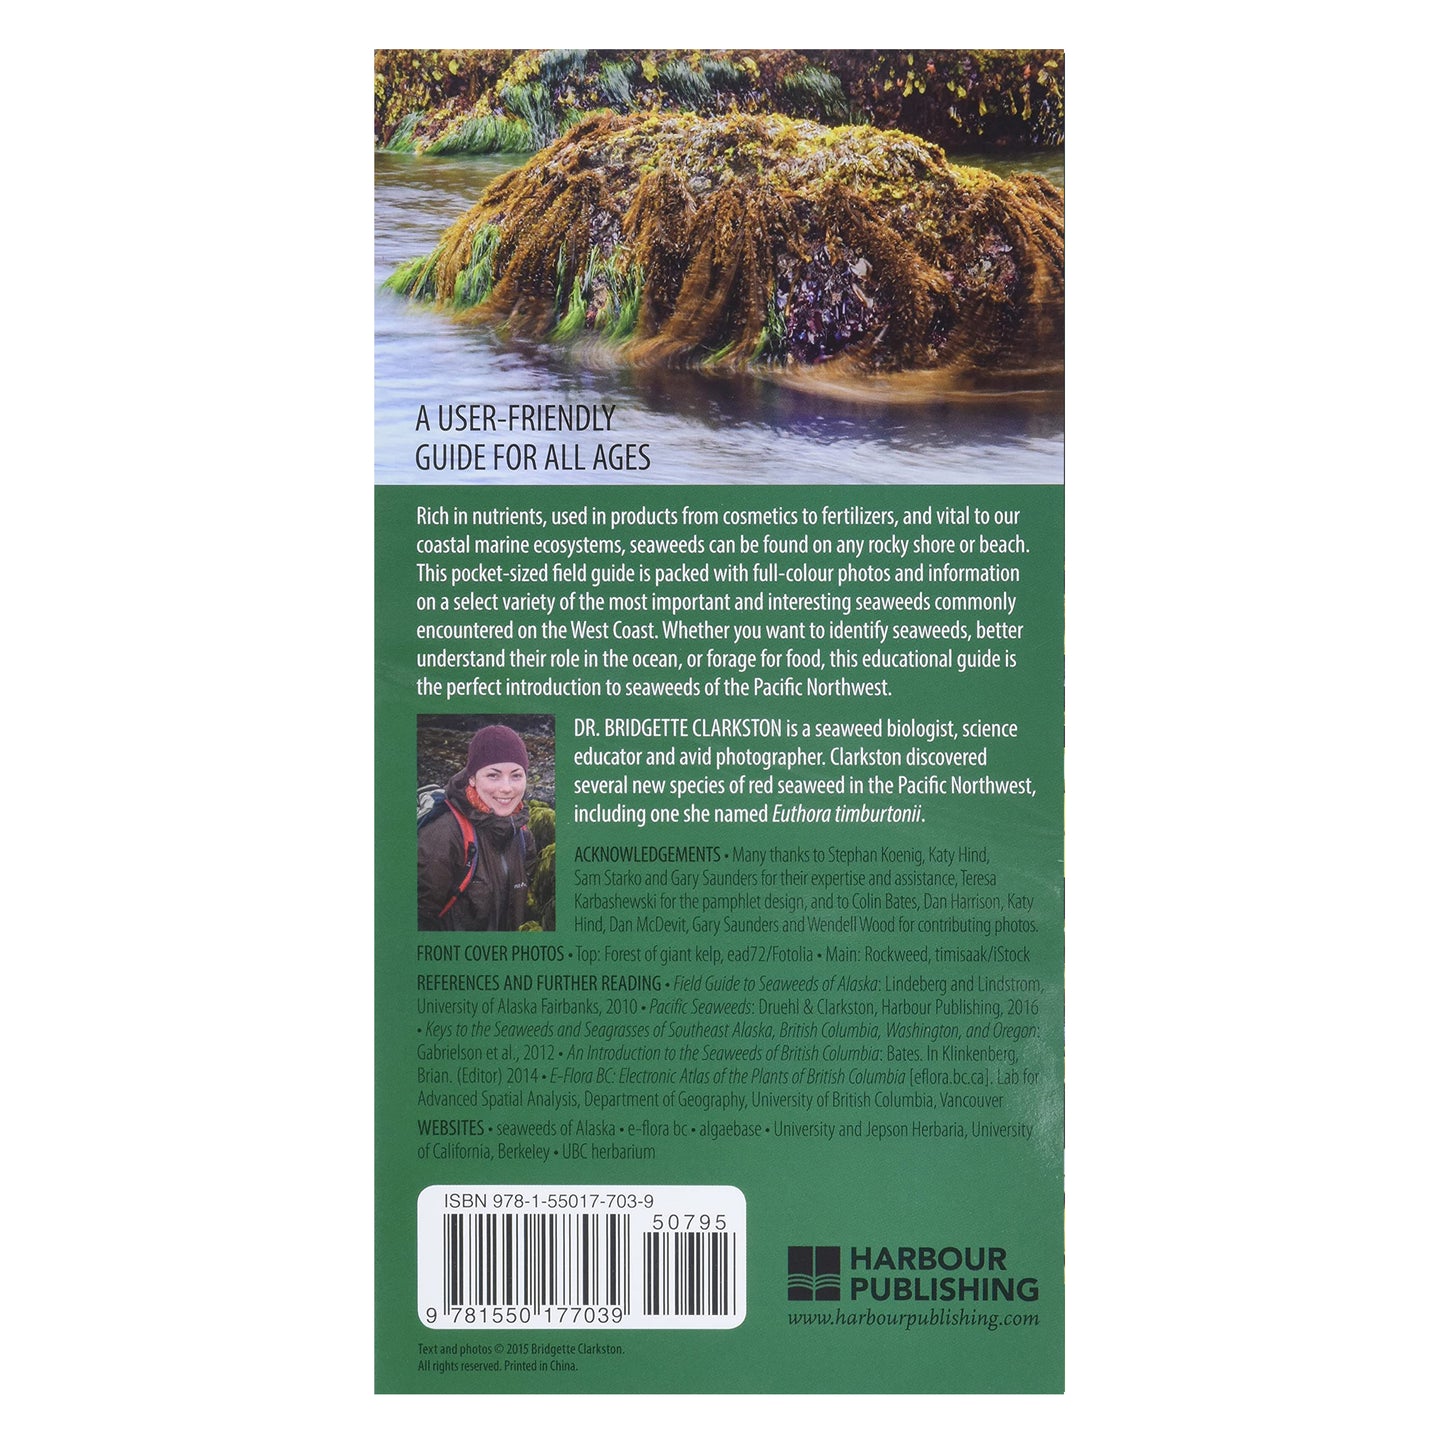 A Field Guide to Seaweeds of the Pacific Northwest by Dr. Bridgette Clarkston